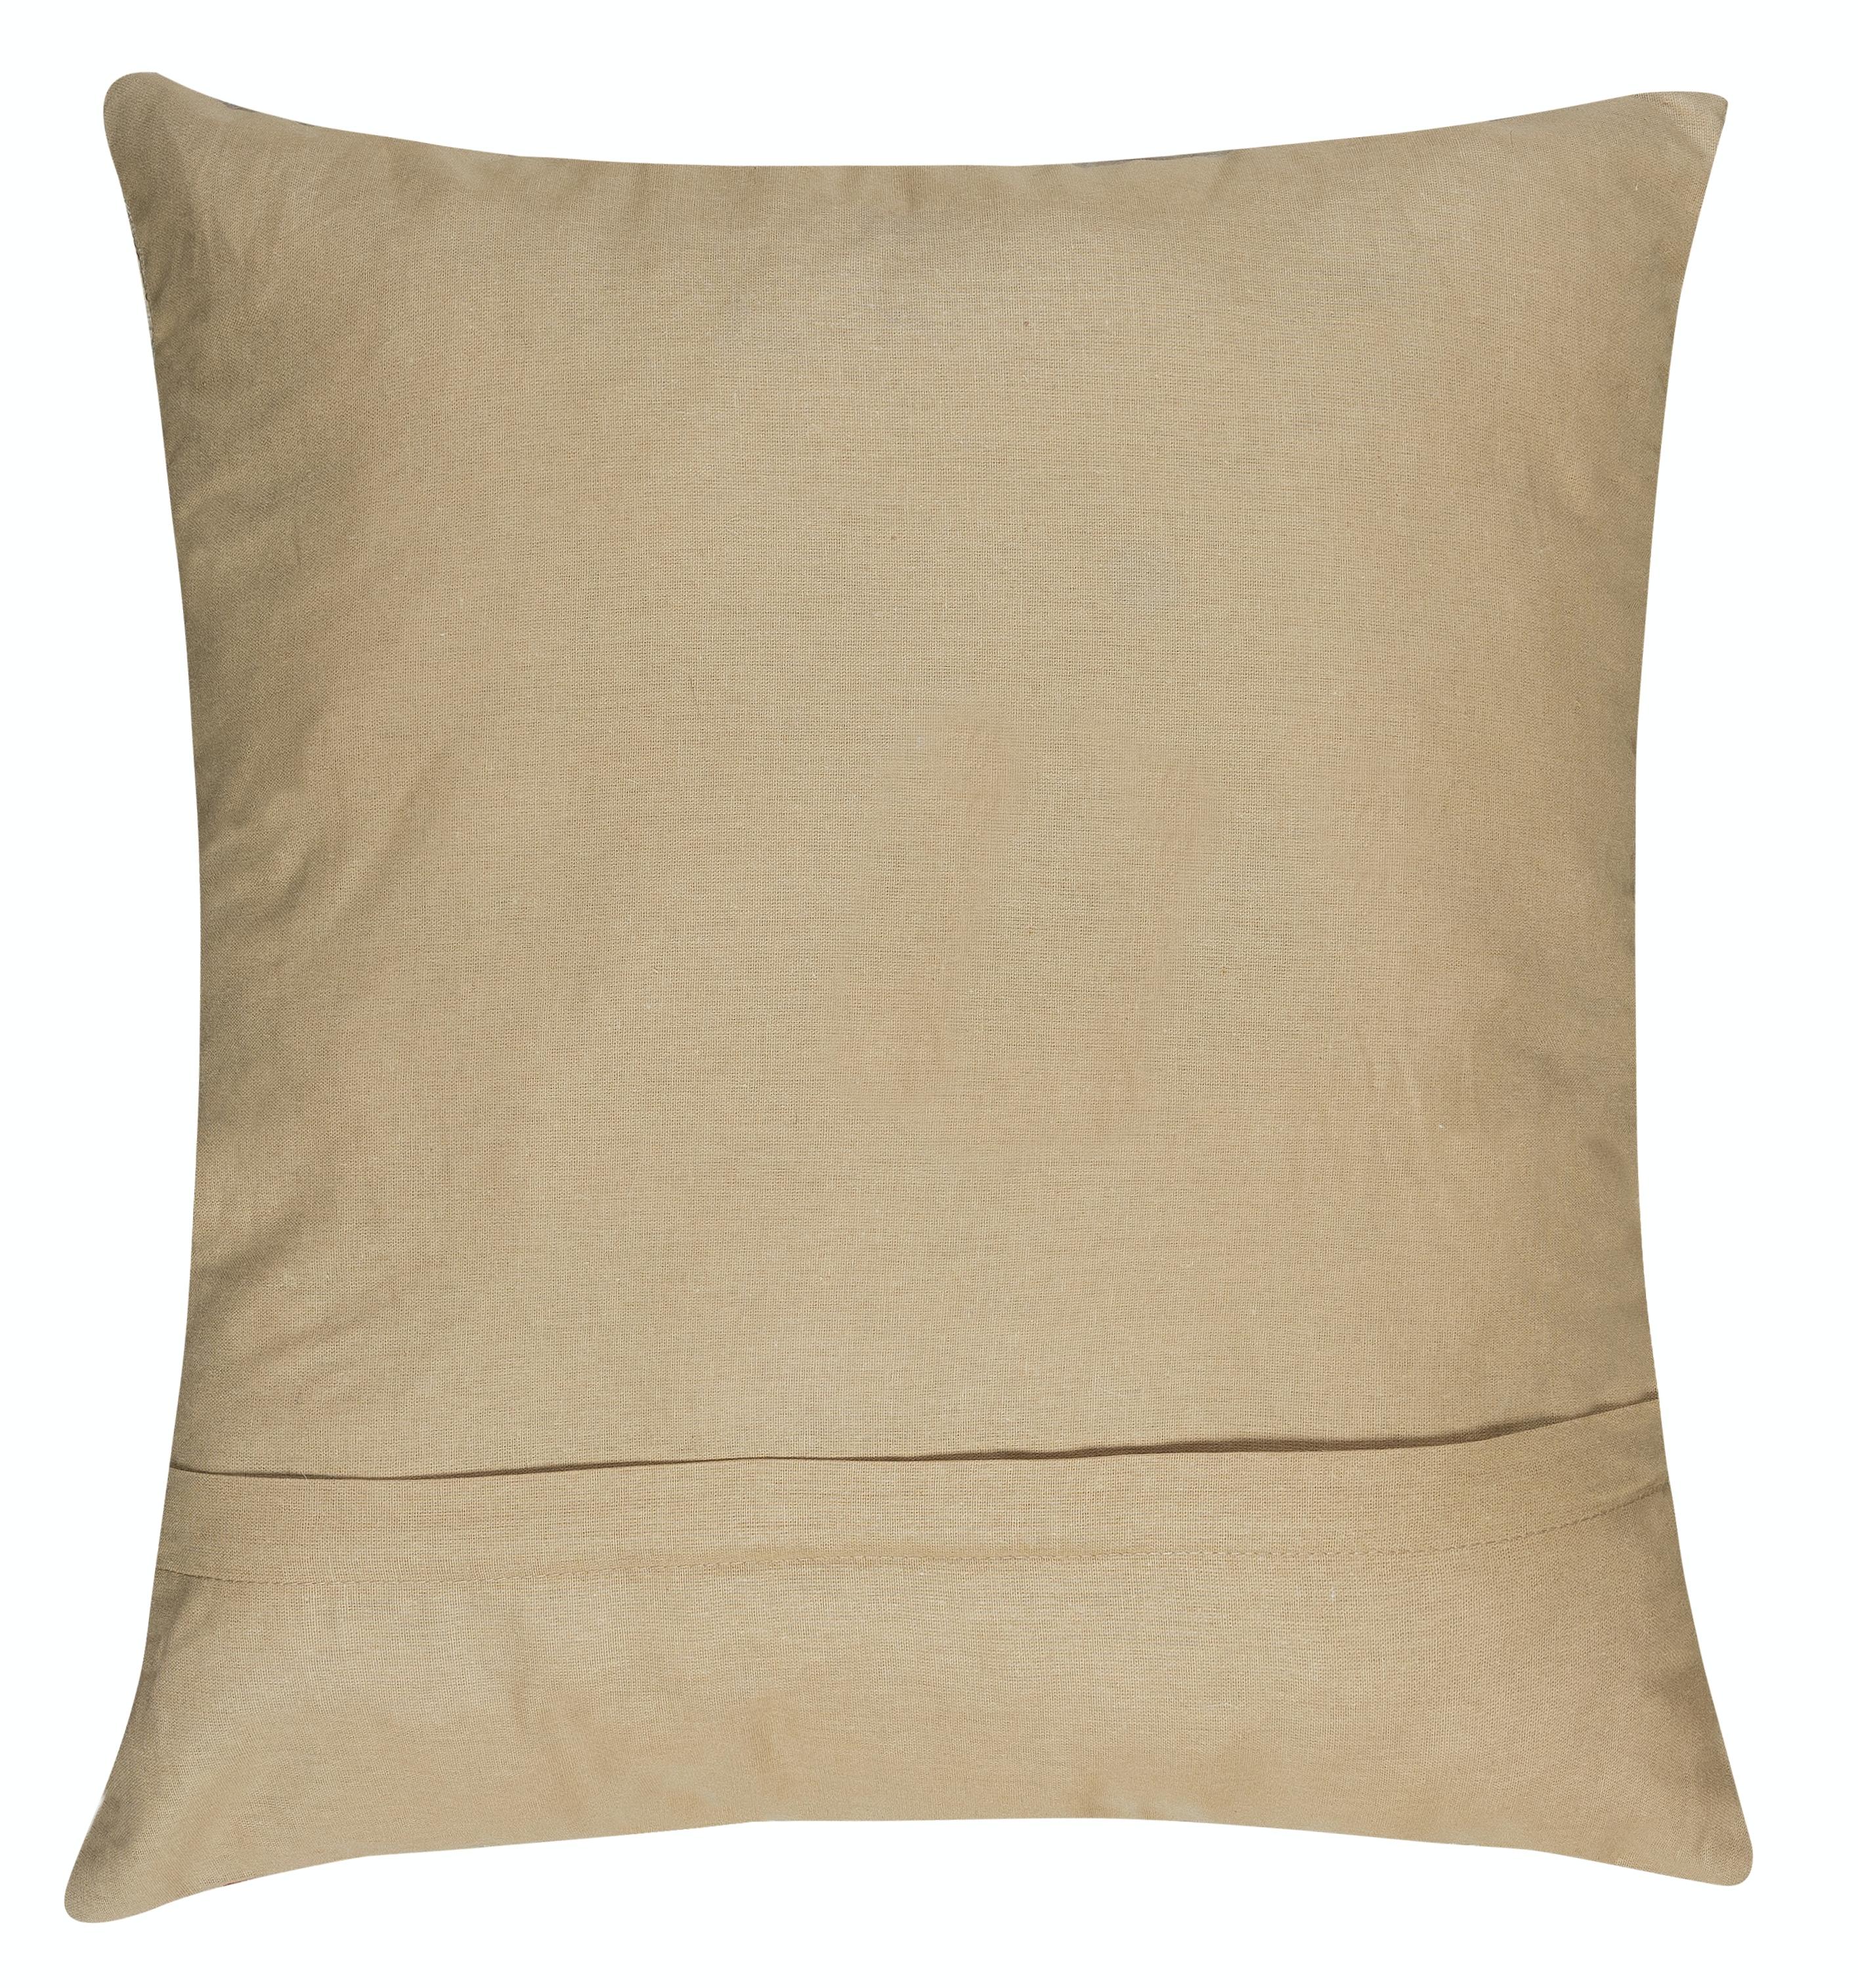 Embroidered Suzani Throw Pillow, 100% Silk Cushion Cover, Hand Embroidery Pillowcase For Sale